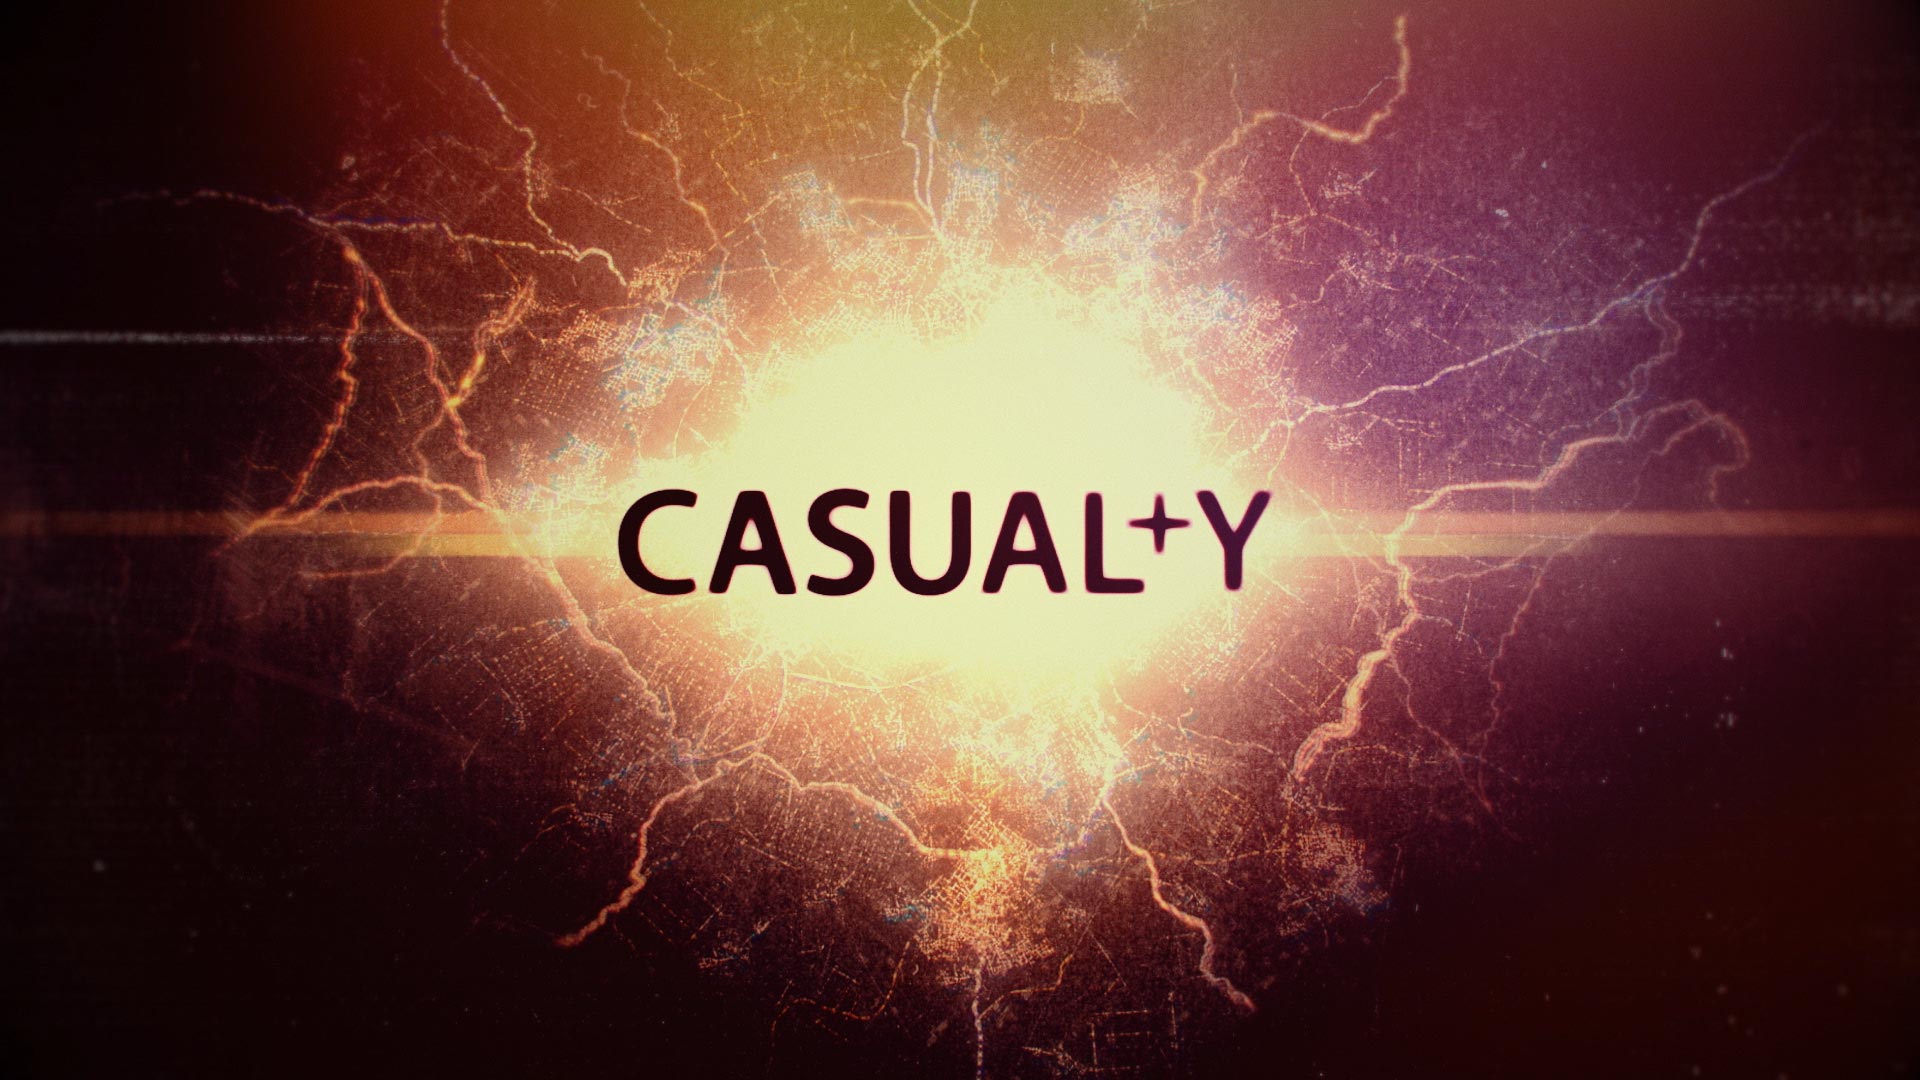 Peter Anderson Studio Casualty Motion Graphics 12